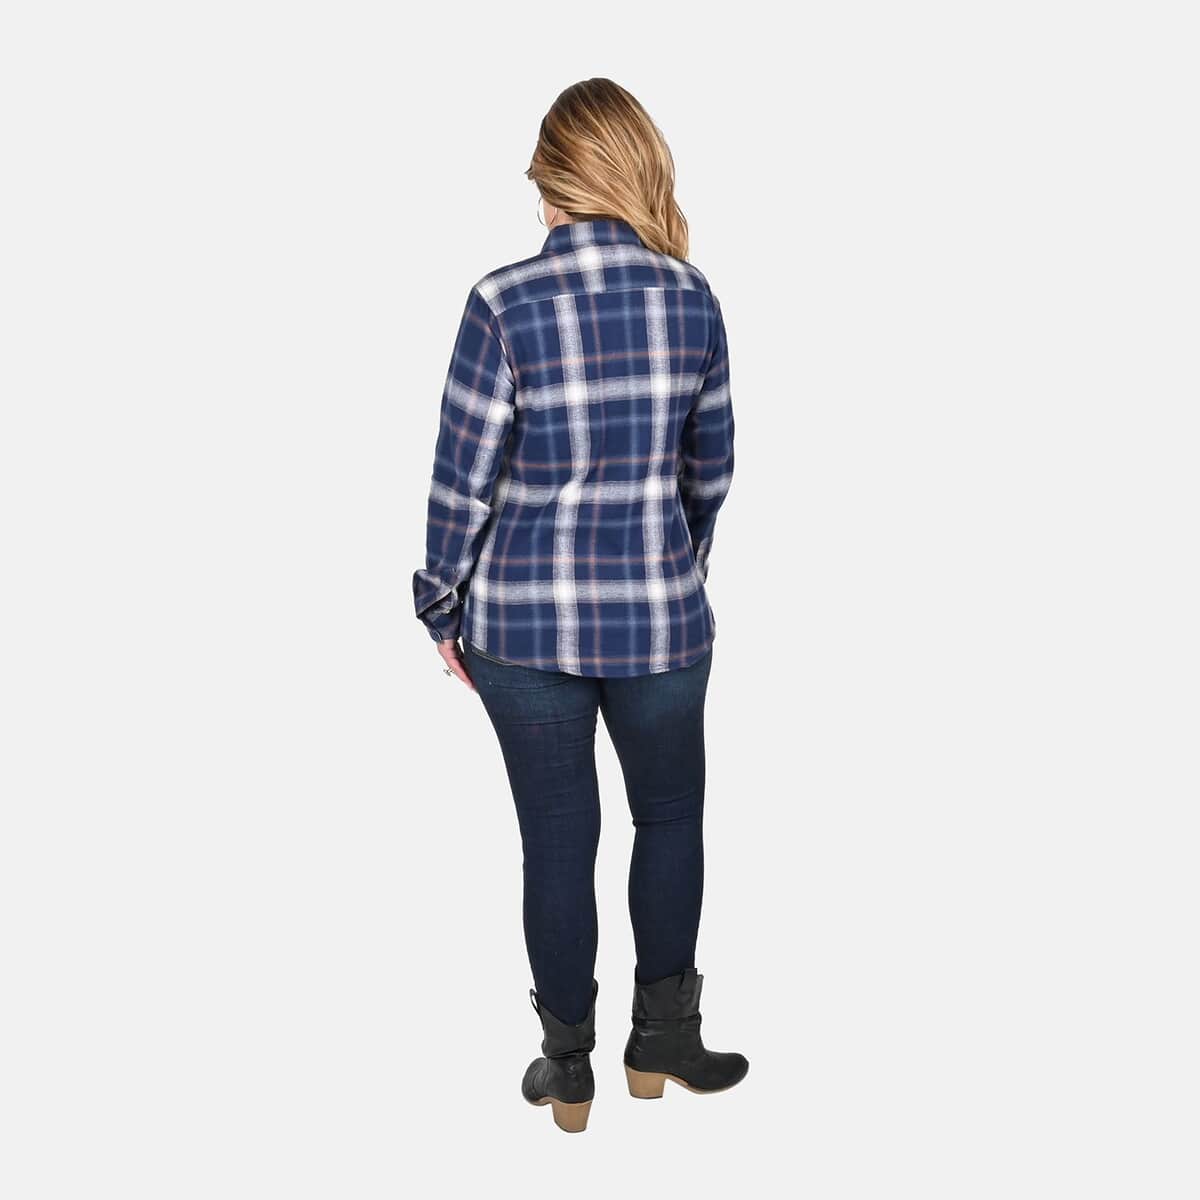 Victory Sportswear Blue and White Plaid Pattern Cotton Flannel Shirt - S image number 1